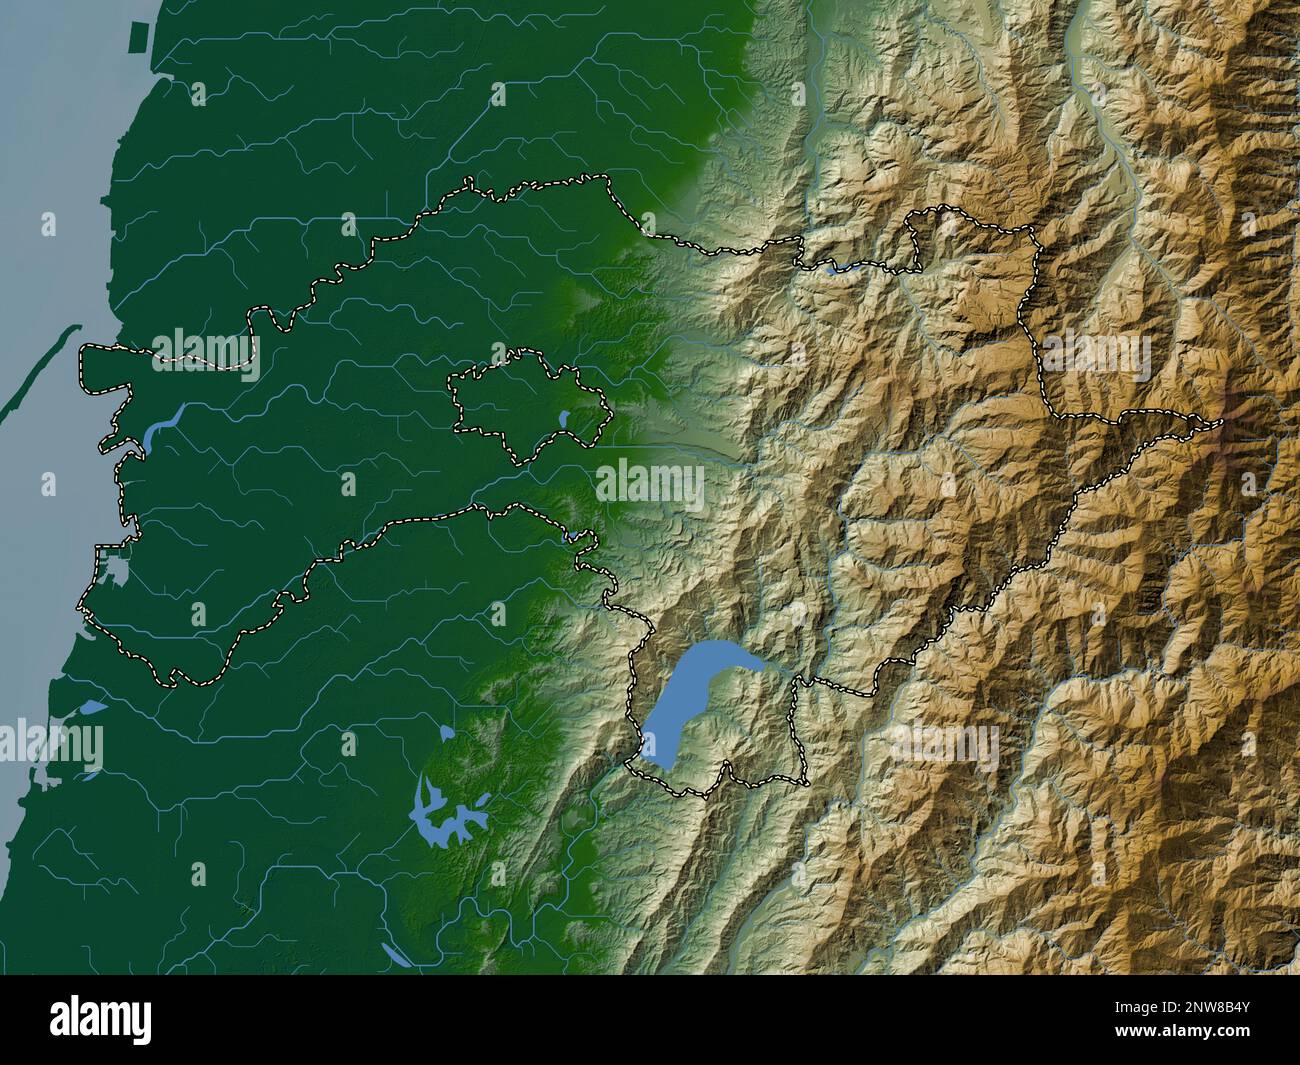 Chiayi, county of Taiwan. Colored elevation map with lakes and rivers Stock Photo